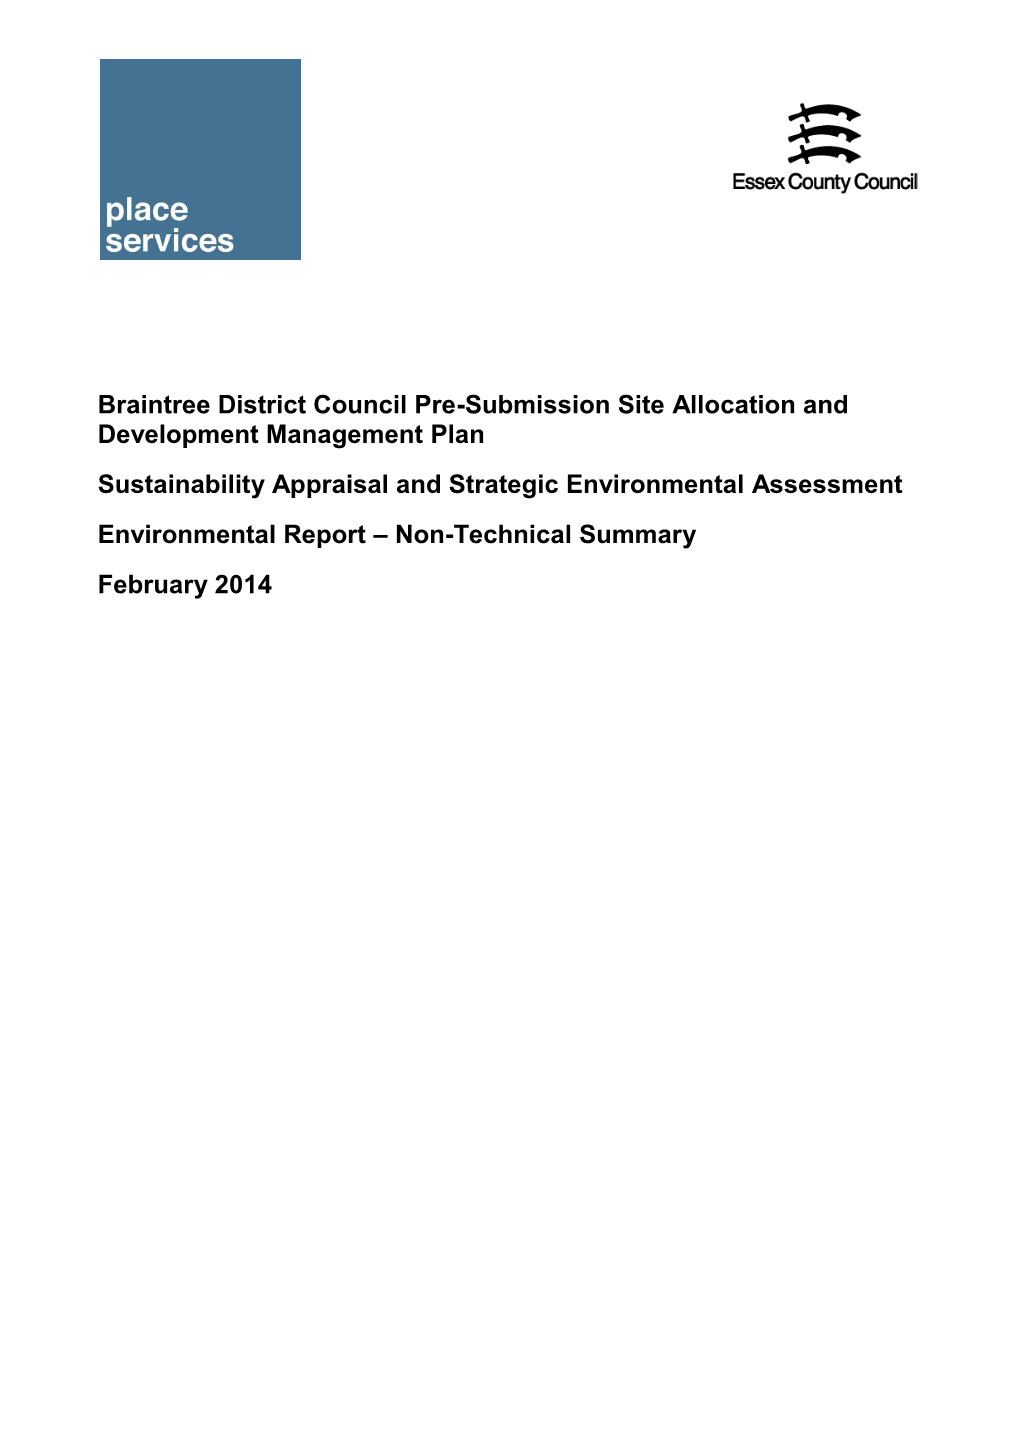 Braintree District Council Pre-Submission Site Allocation And